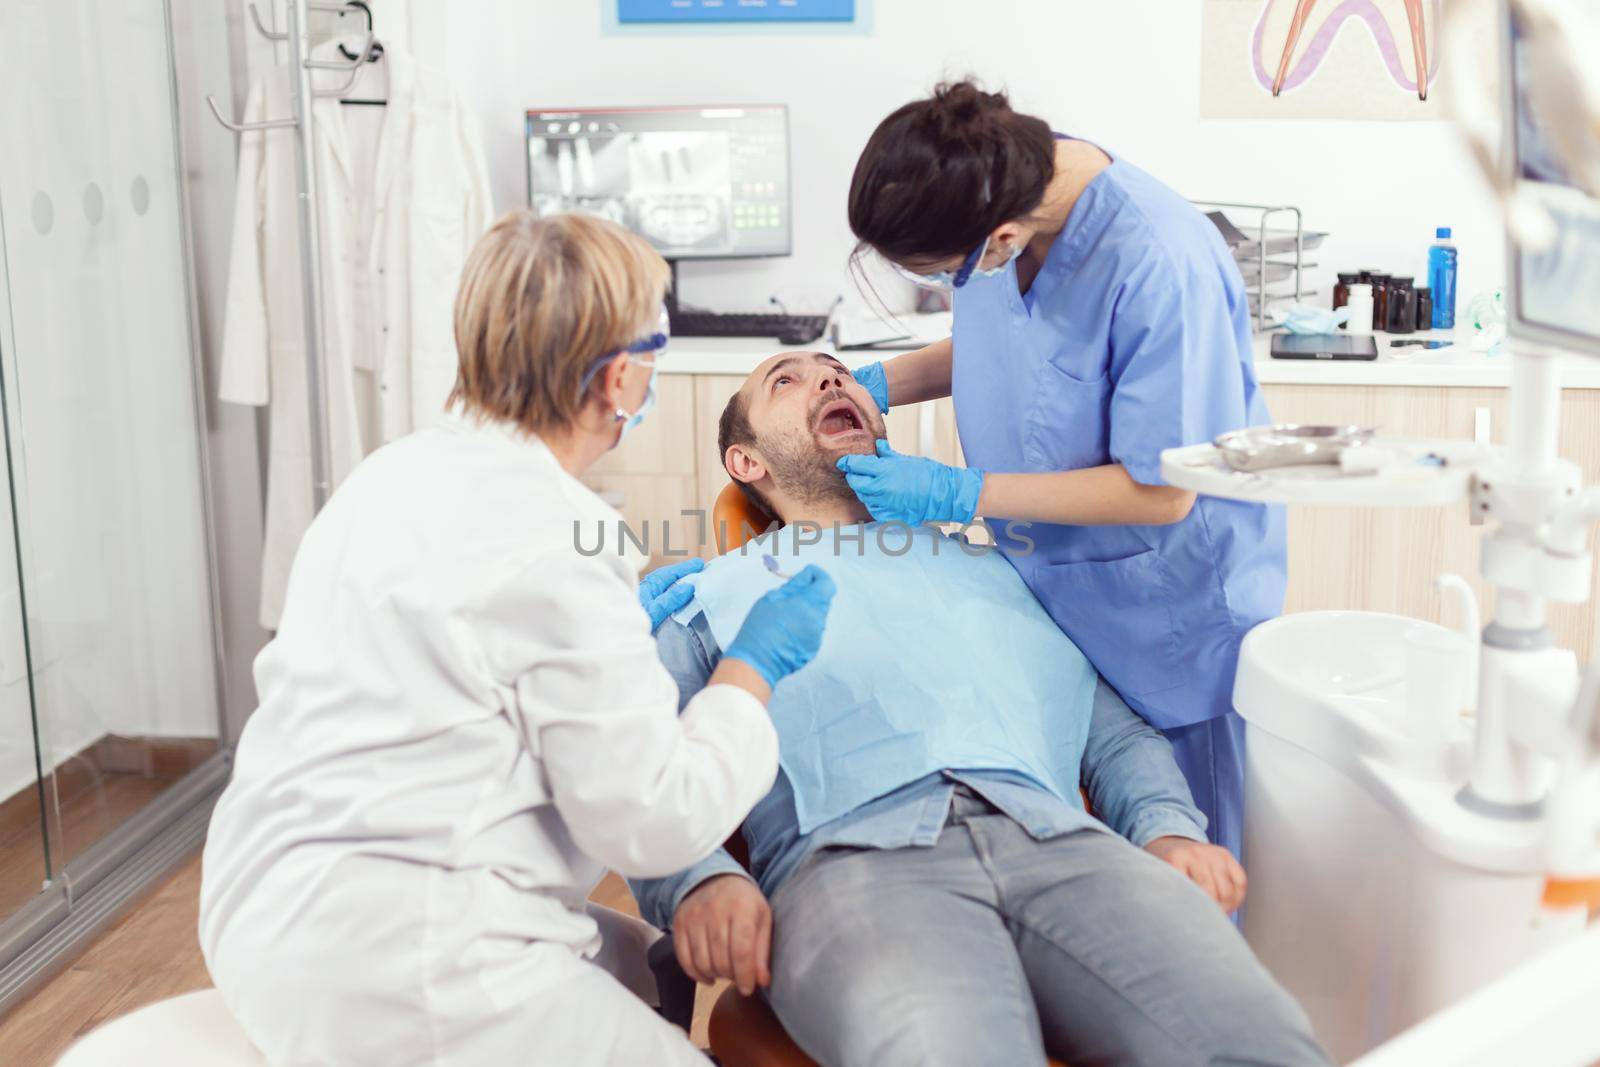 Sick man sitting on dental chair with open mouth while medical nurse with face mask and gloves analyzing teeth health during stomatology consultation. Hospital team working in stomatological clinic